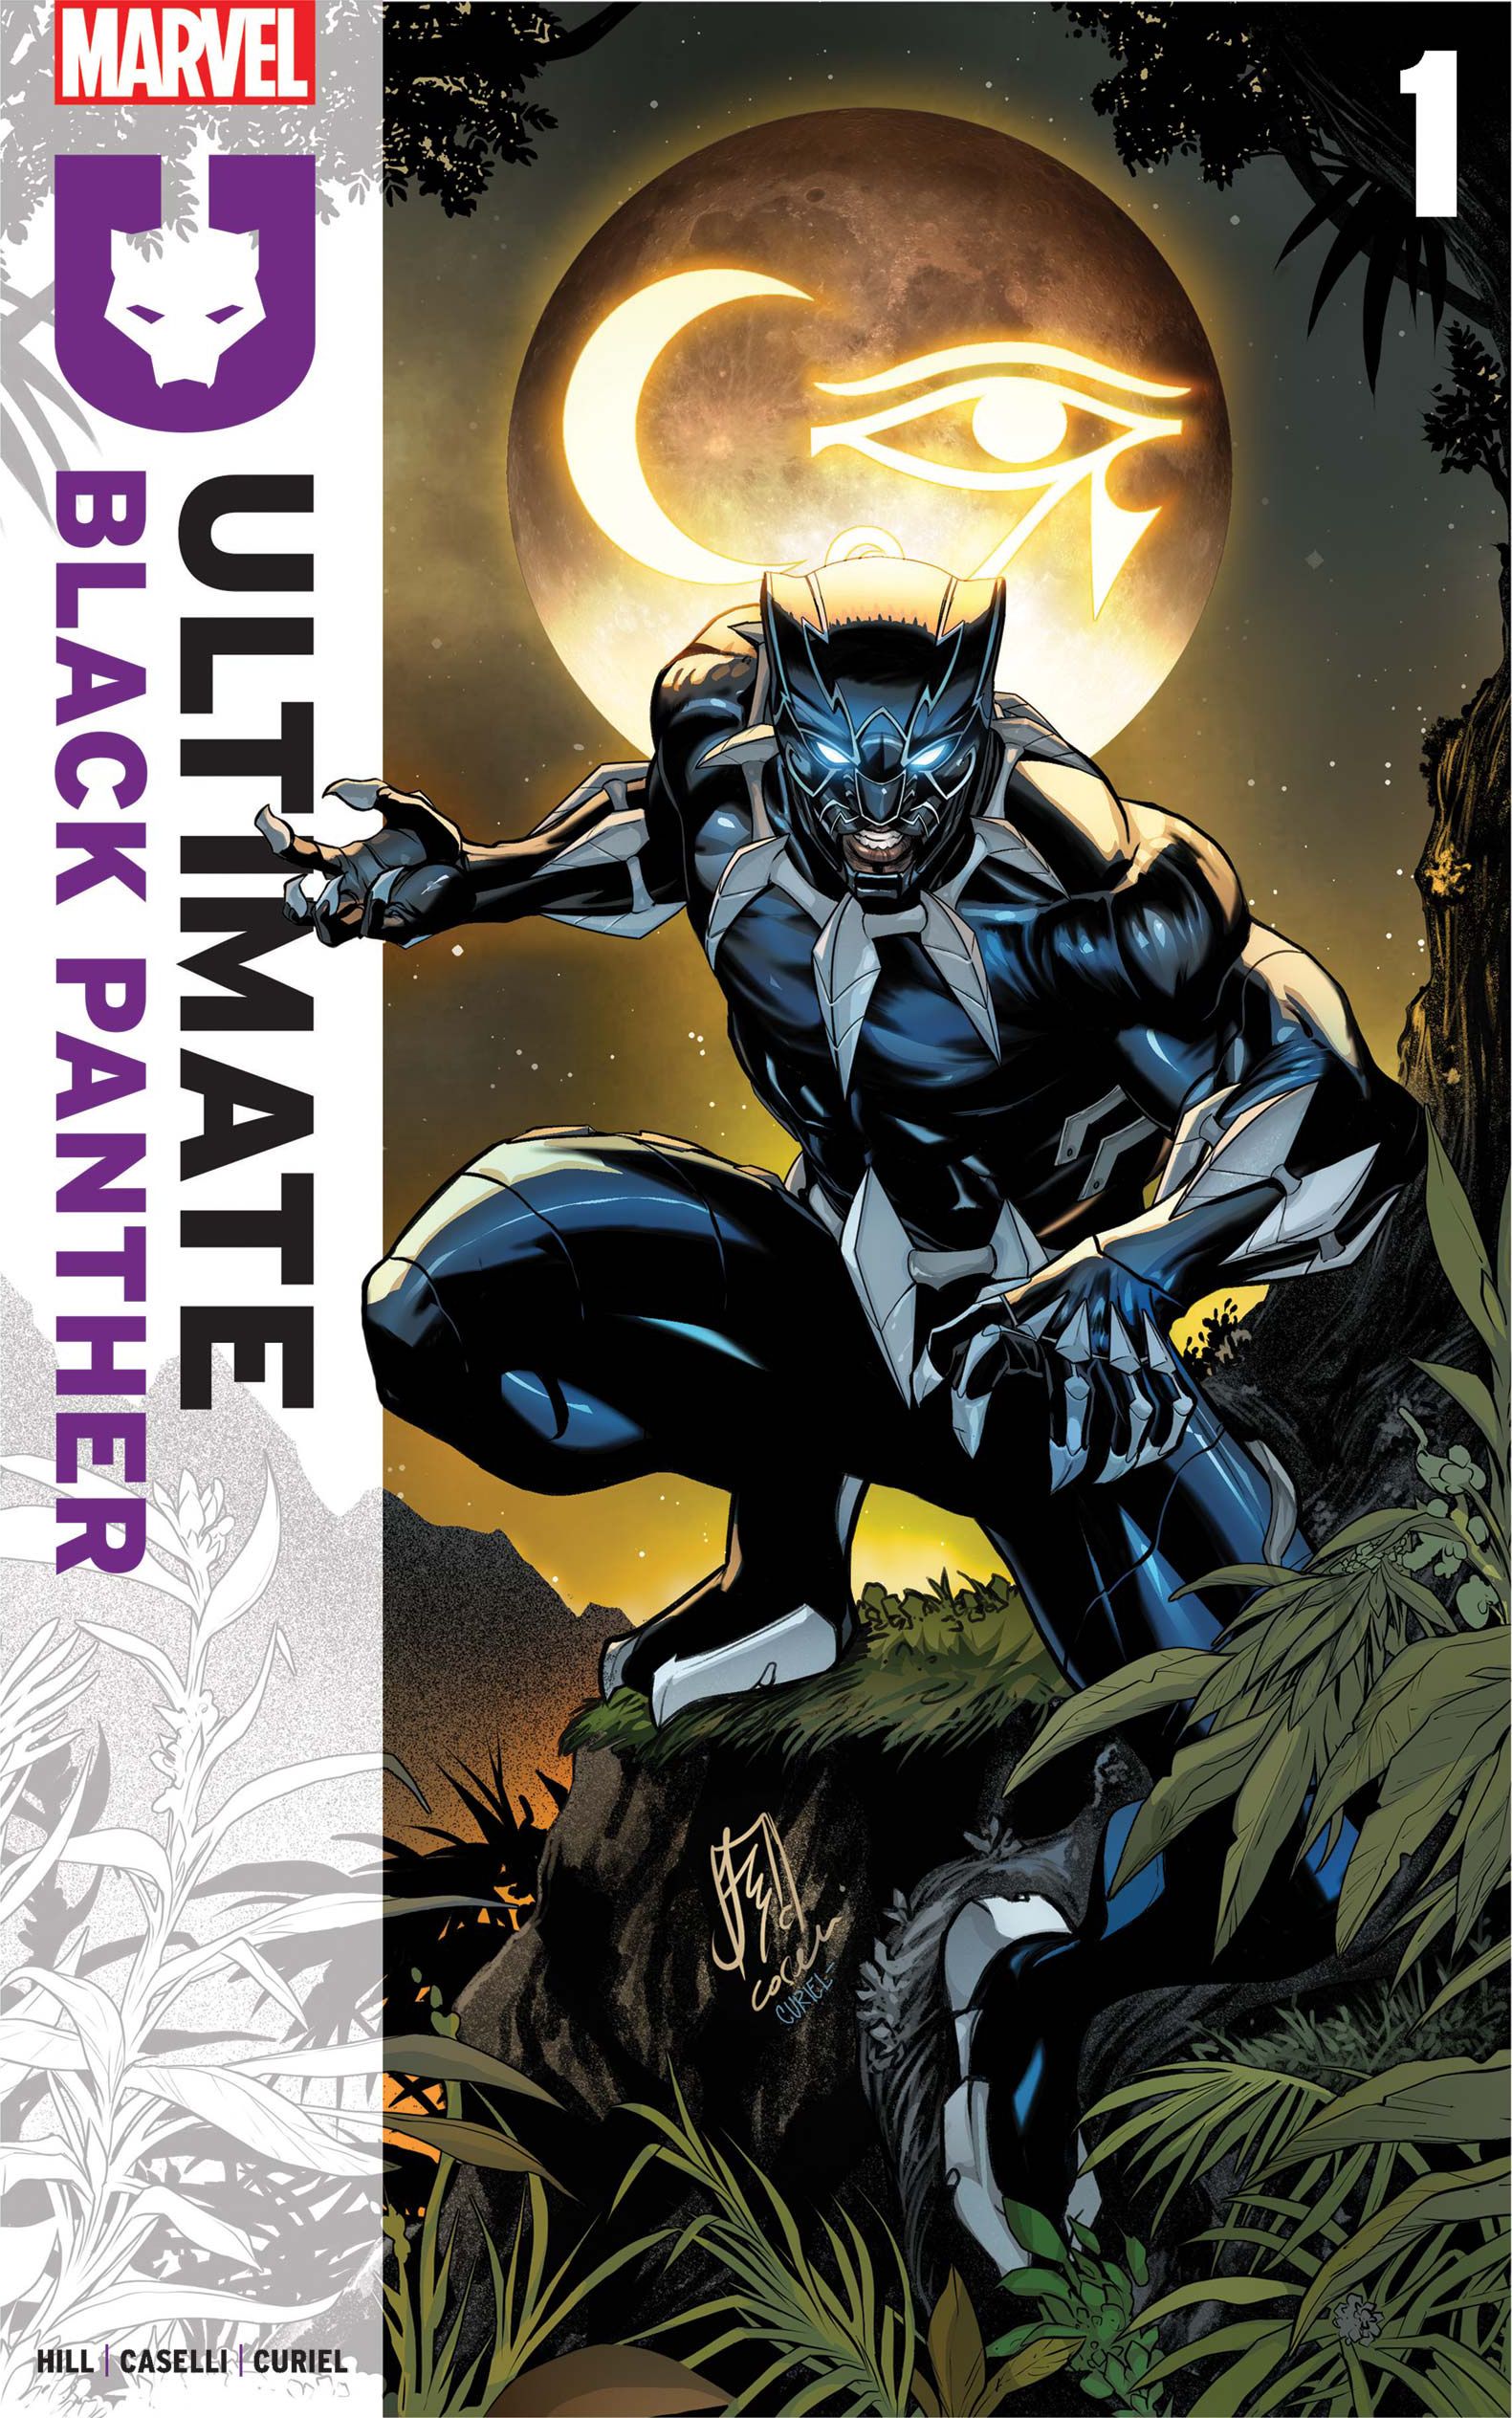 Black Panther lurks under the moonlight in Ultimate Black Panther